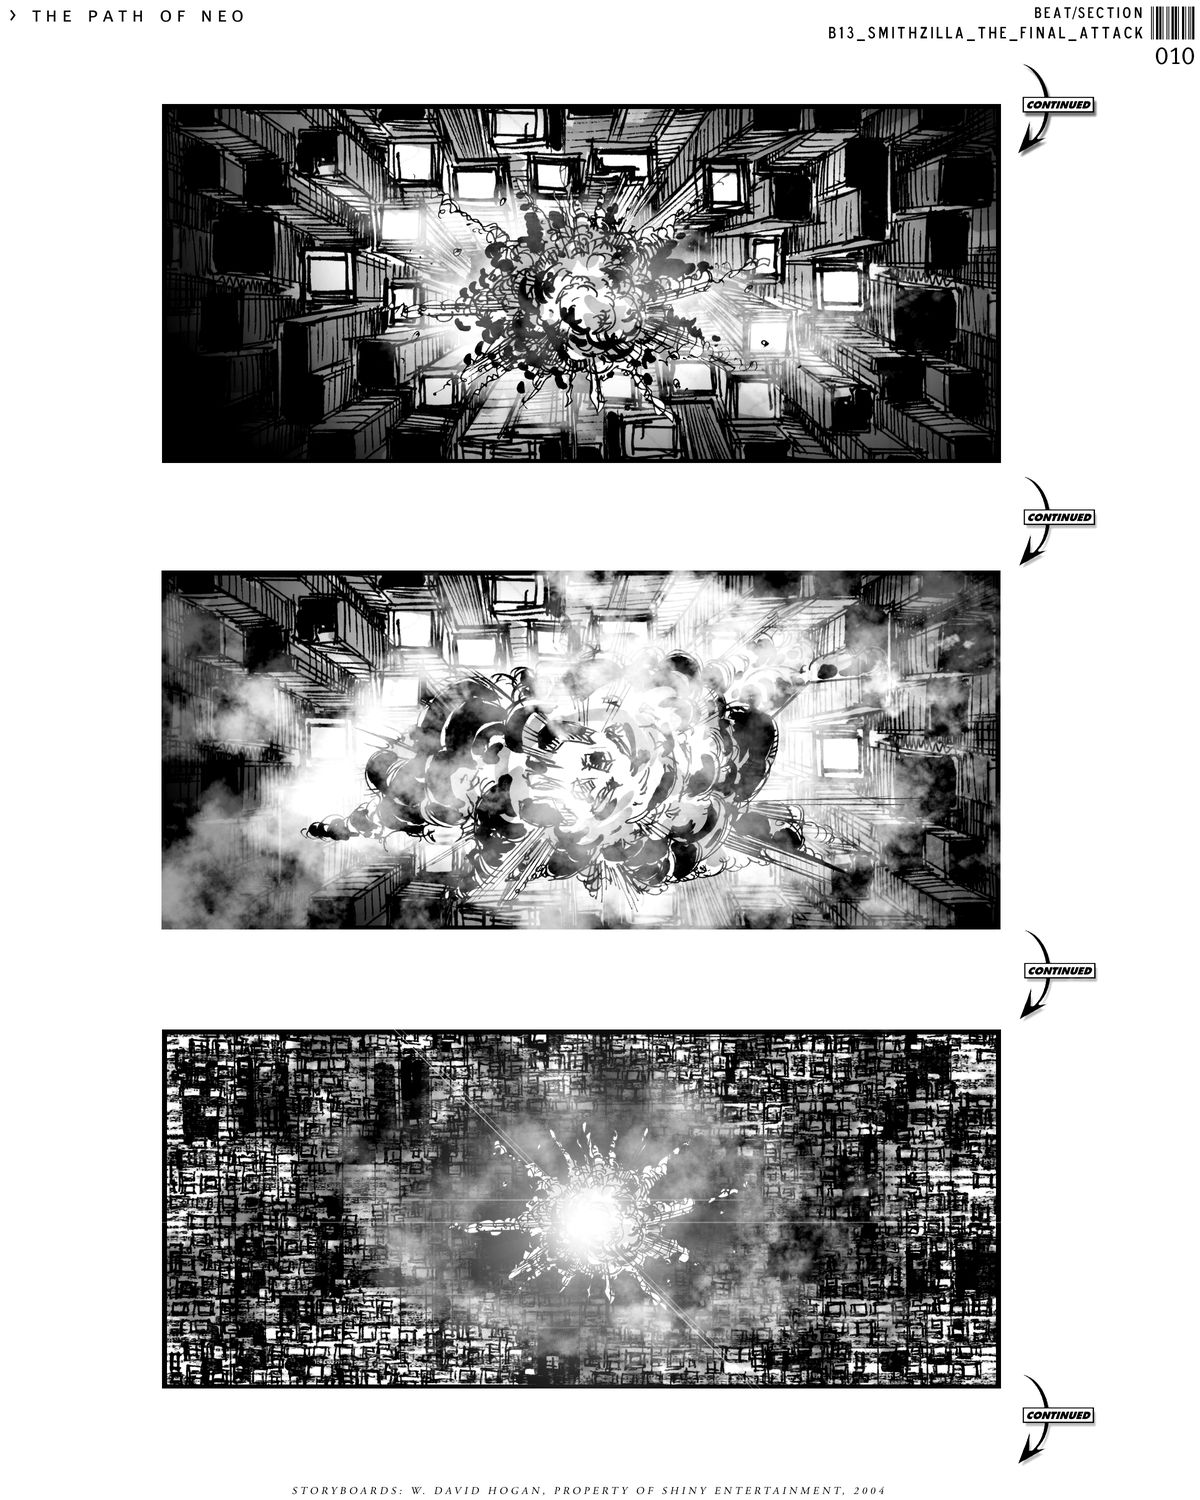 A trio of storyboards for Path of Neo depicting a massive explosion